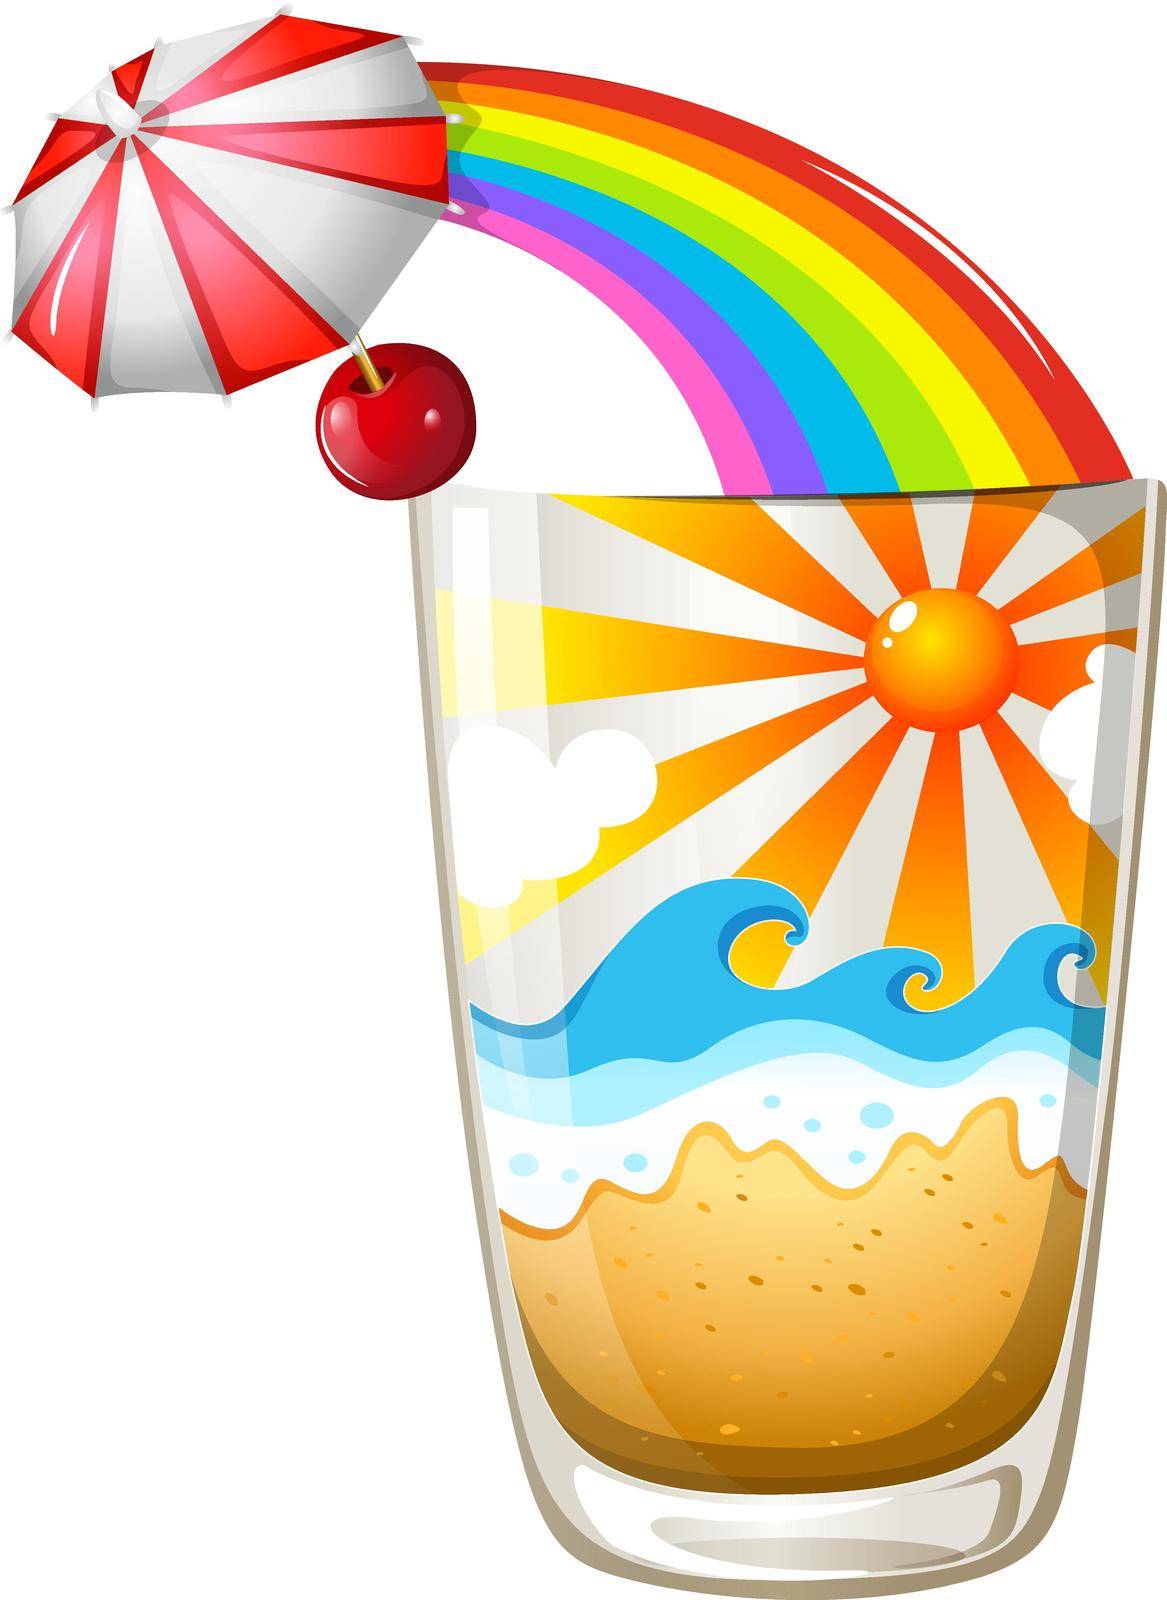 Illustration of a glass with a summer template on a white background